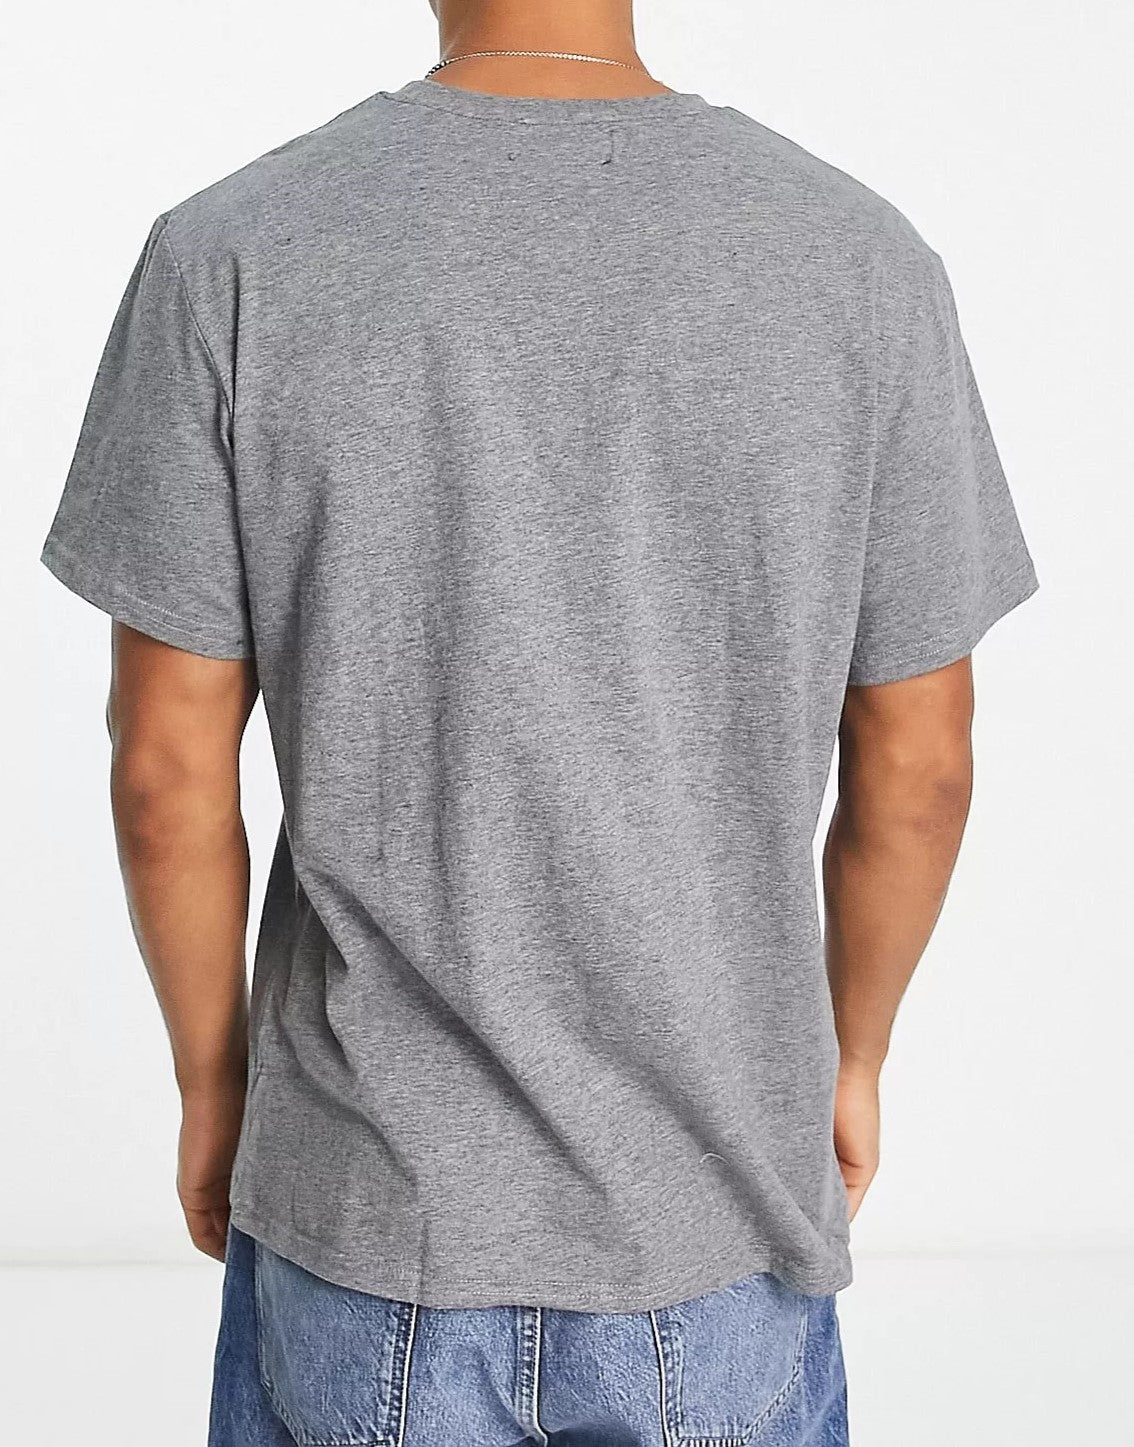 DKNY Mens Nailers Lounge T-Shirt In Charcoal